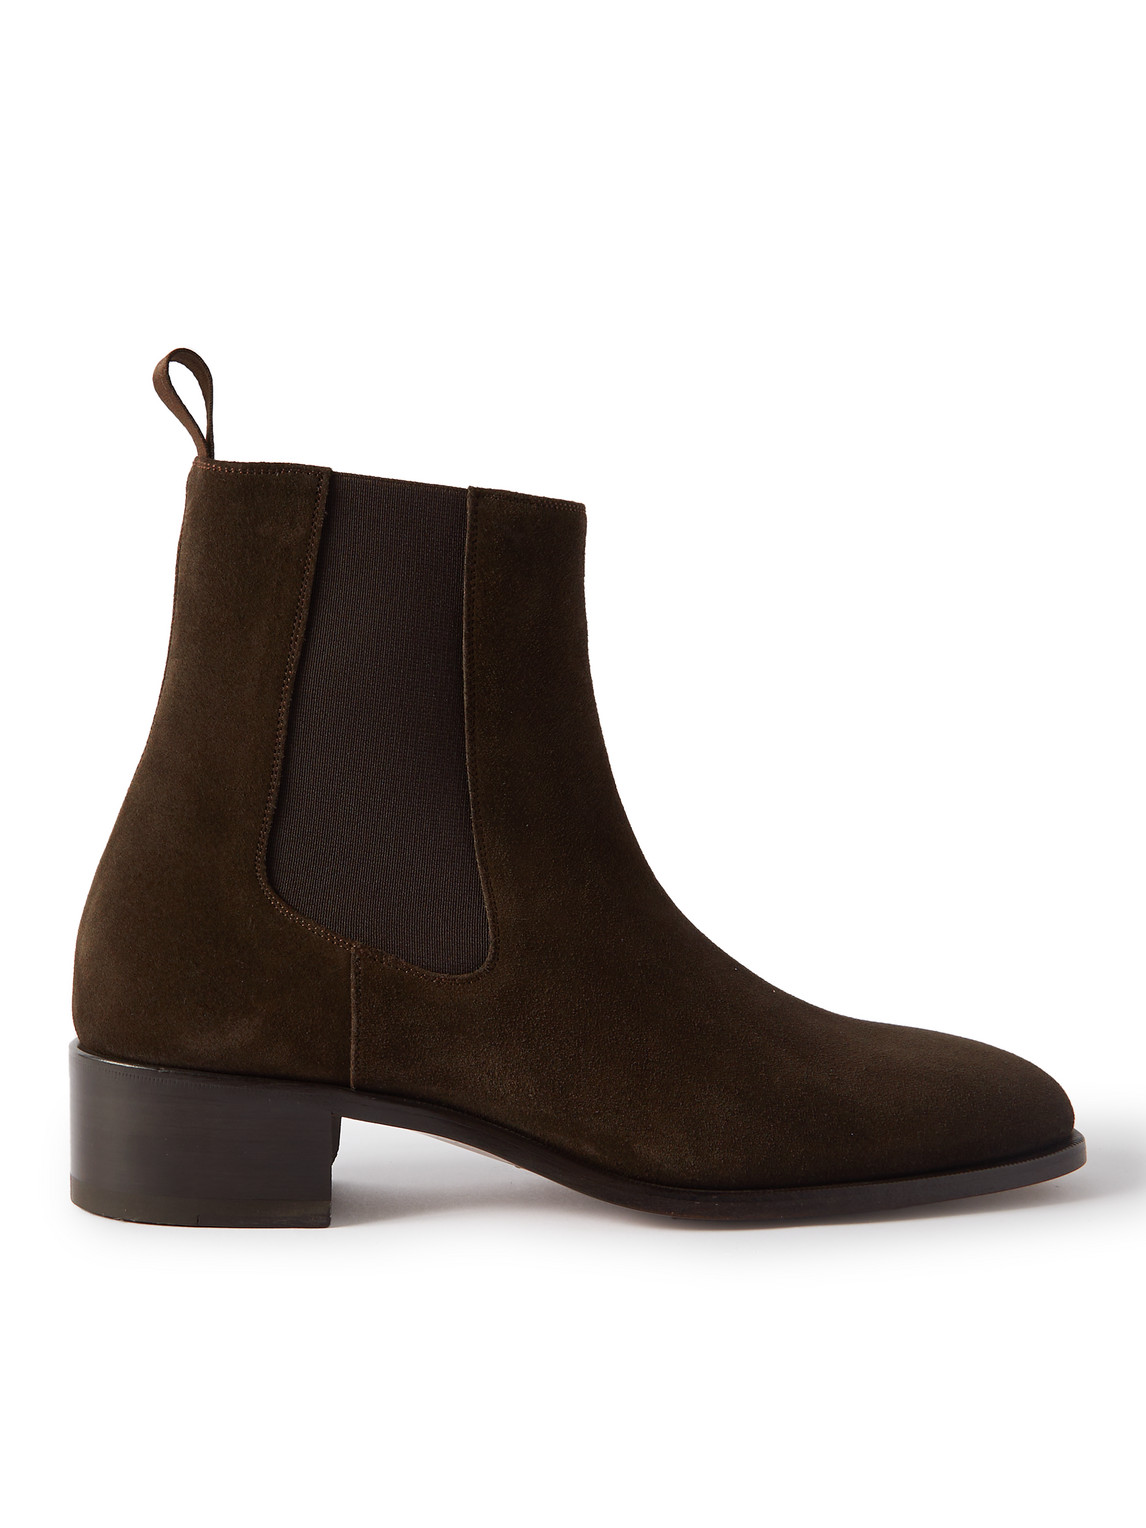 TOM FORD ALEC SUEDE CHELSEA BOOTS